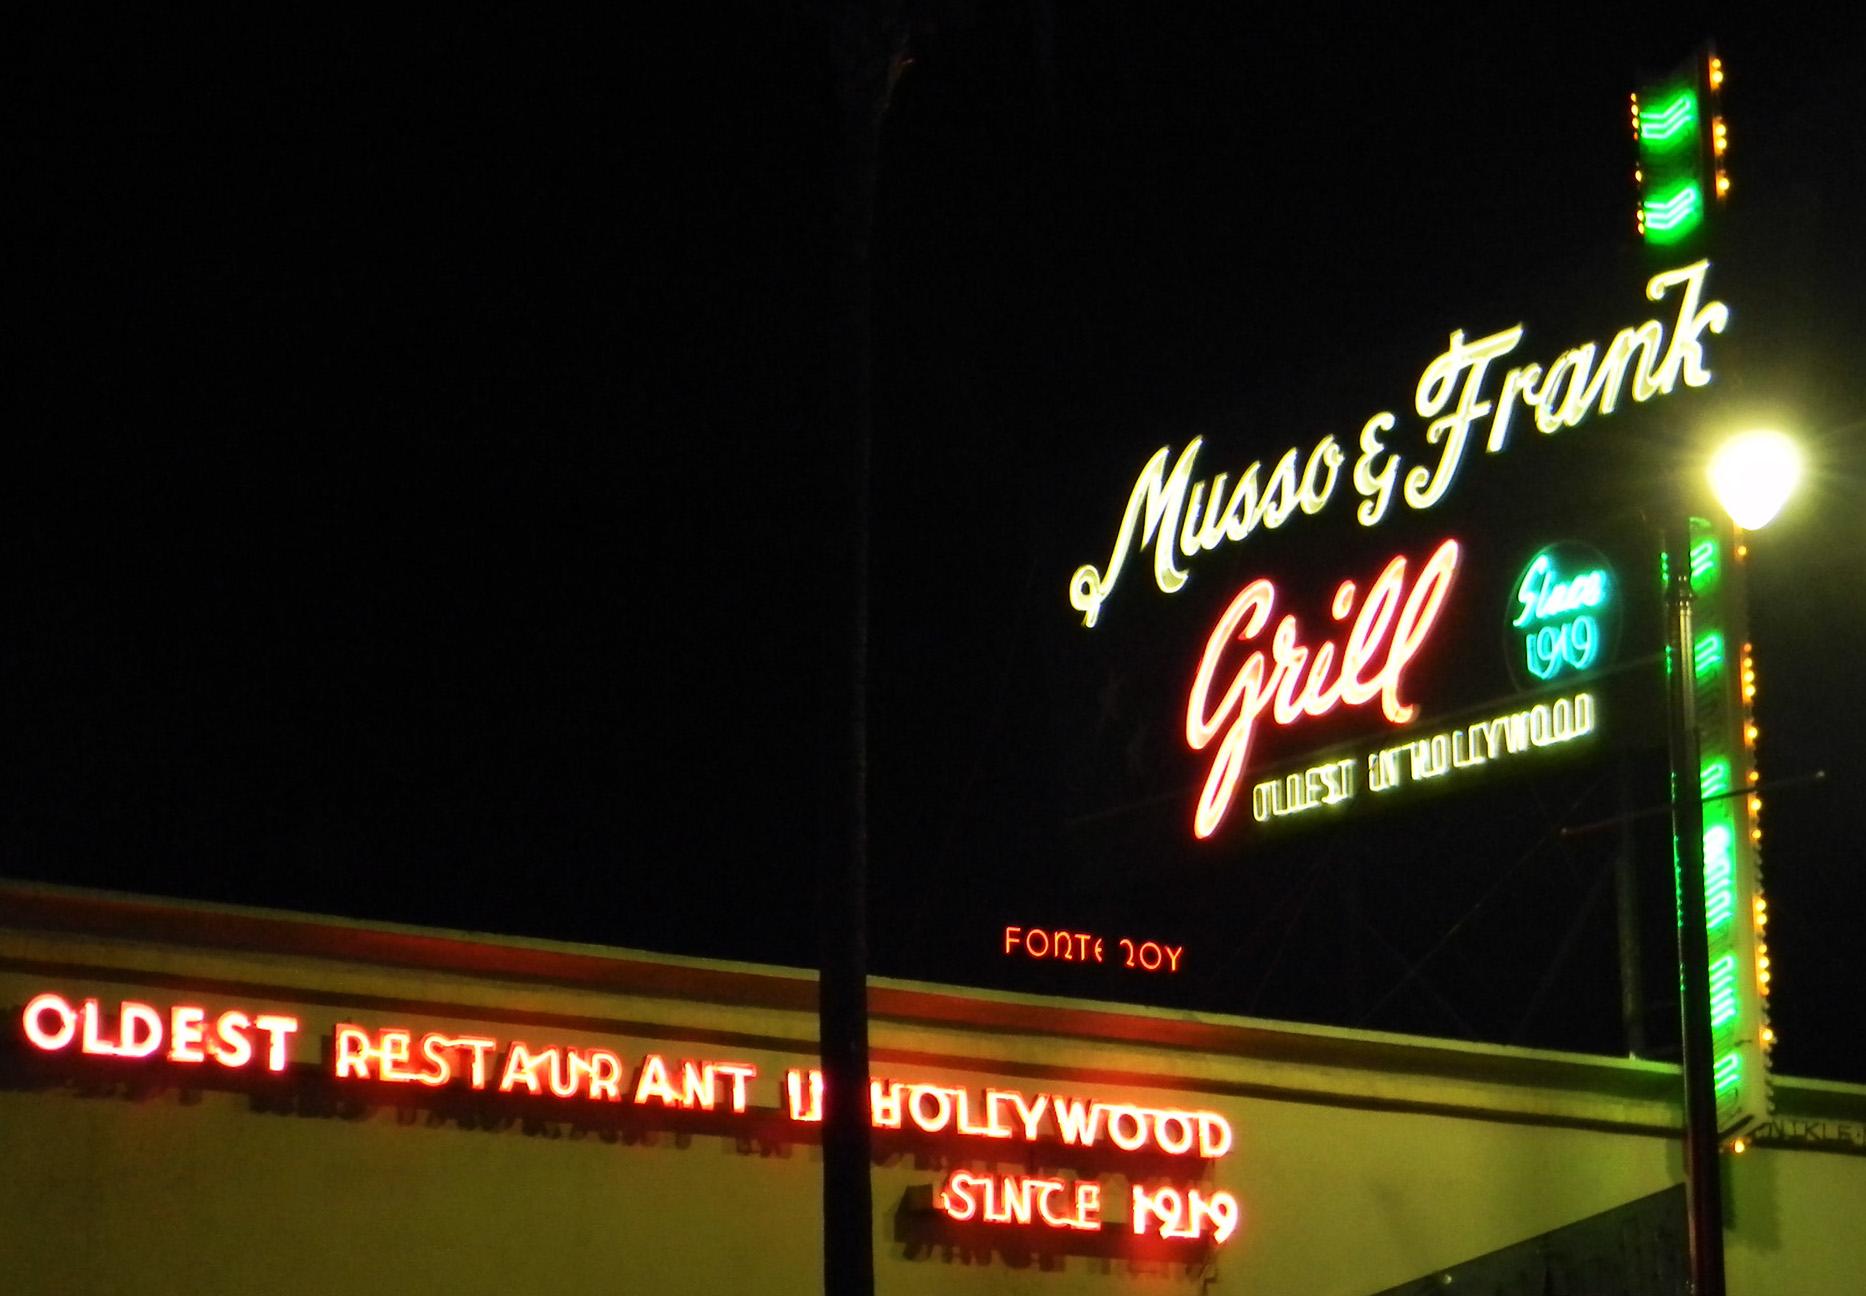 Ресторан "Musso and Frank Grill"